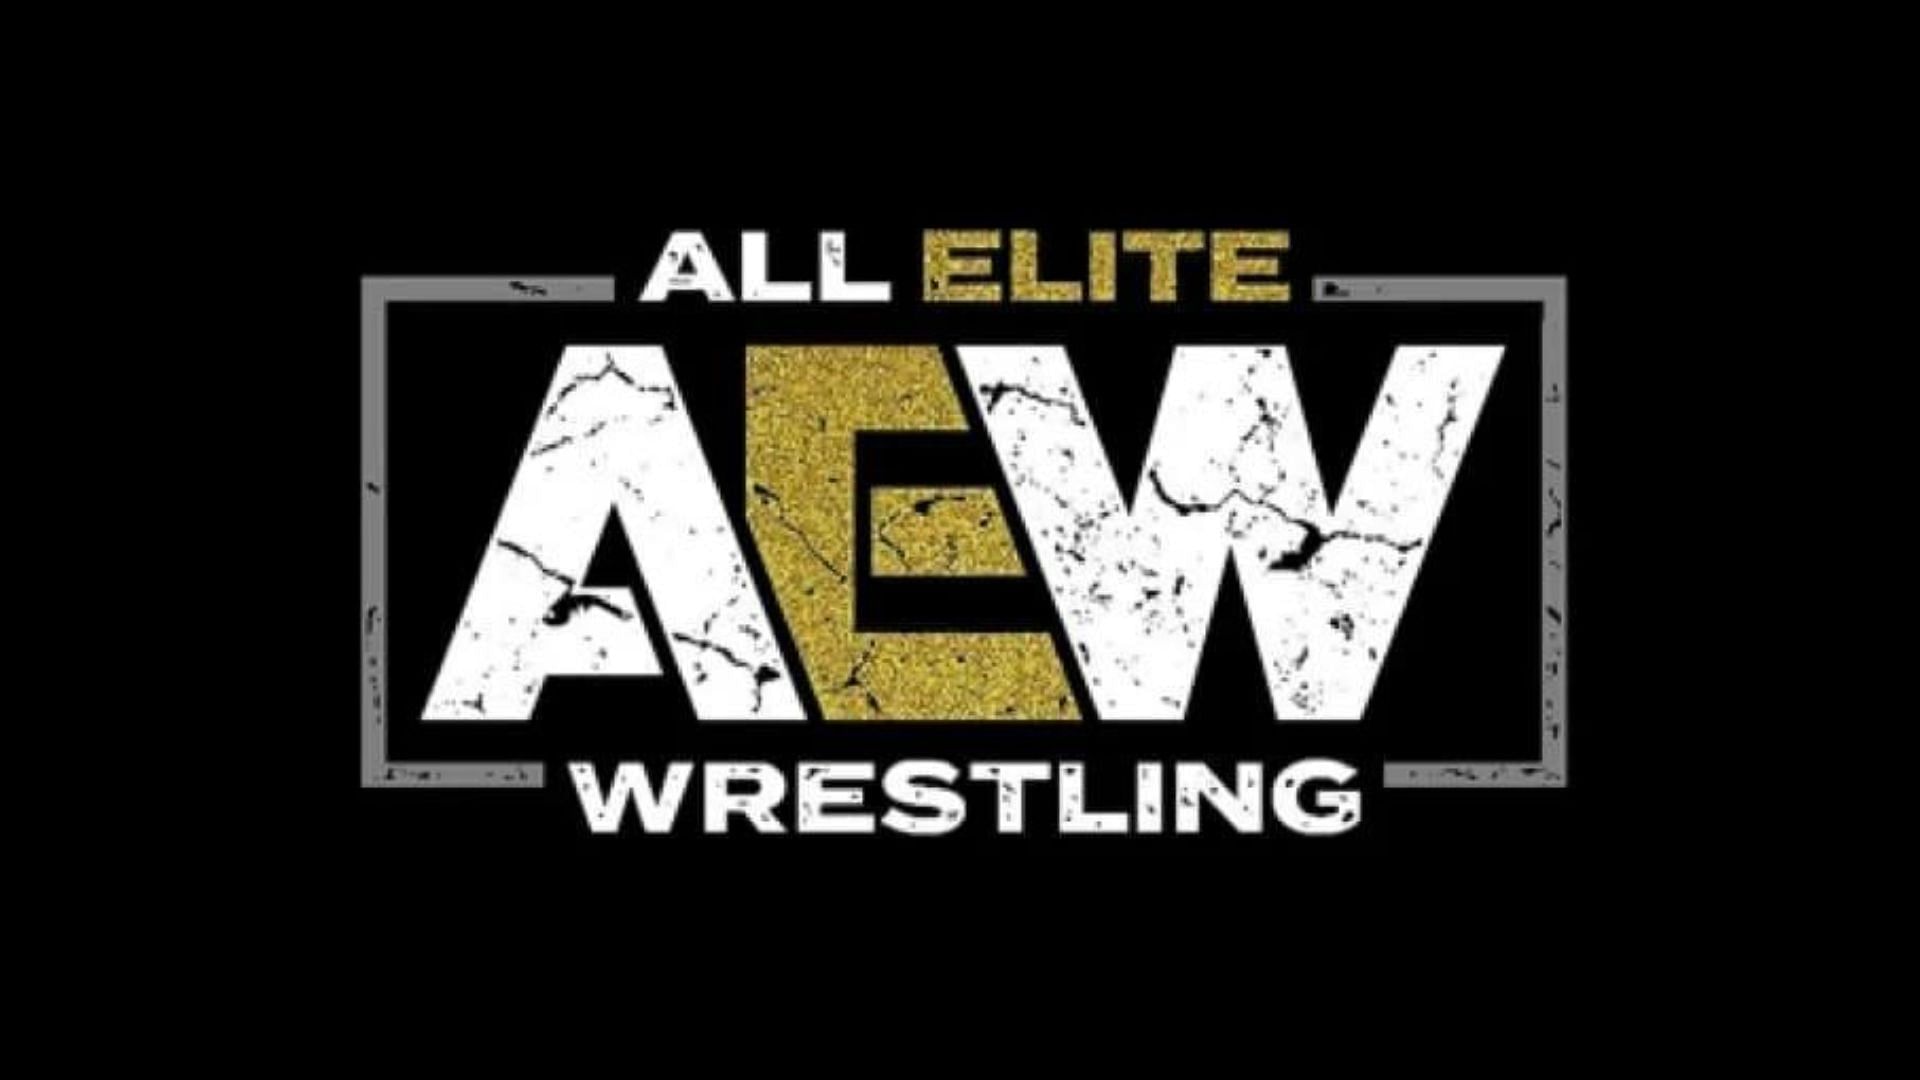 Find out which star wants to go to AEW?